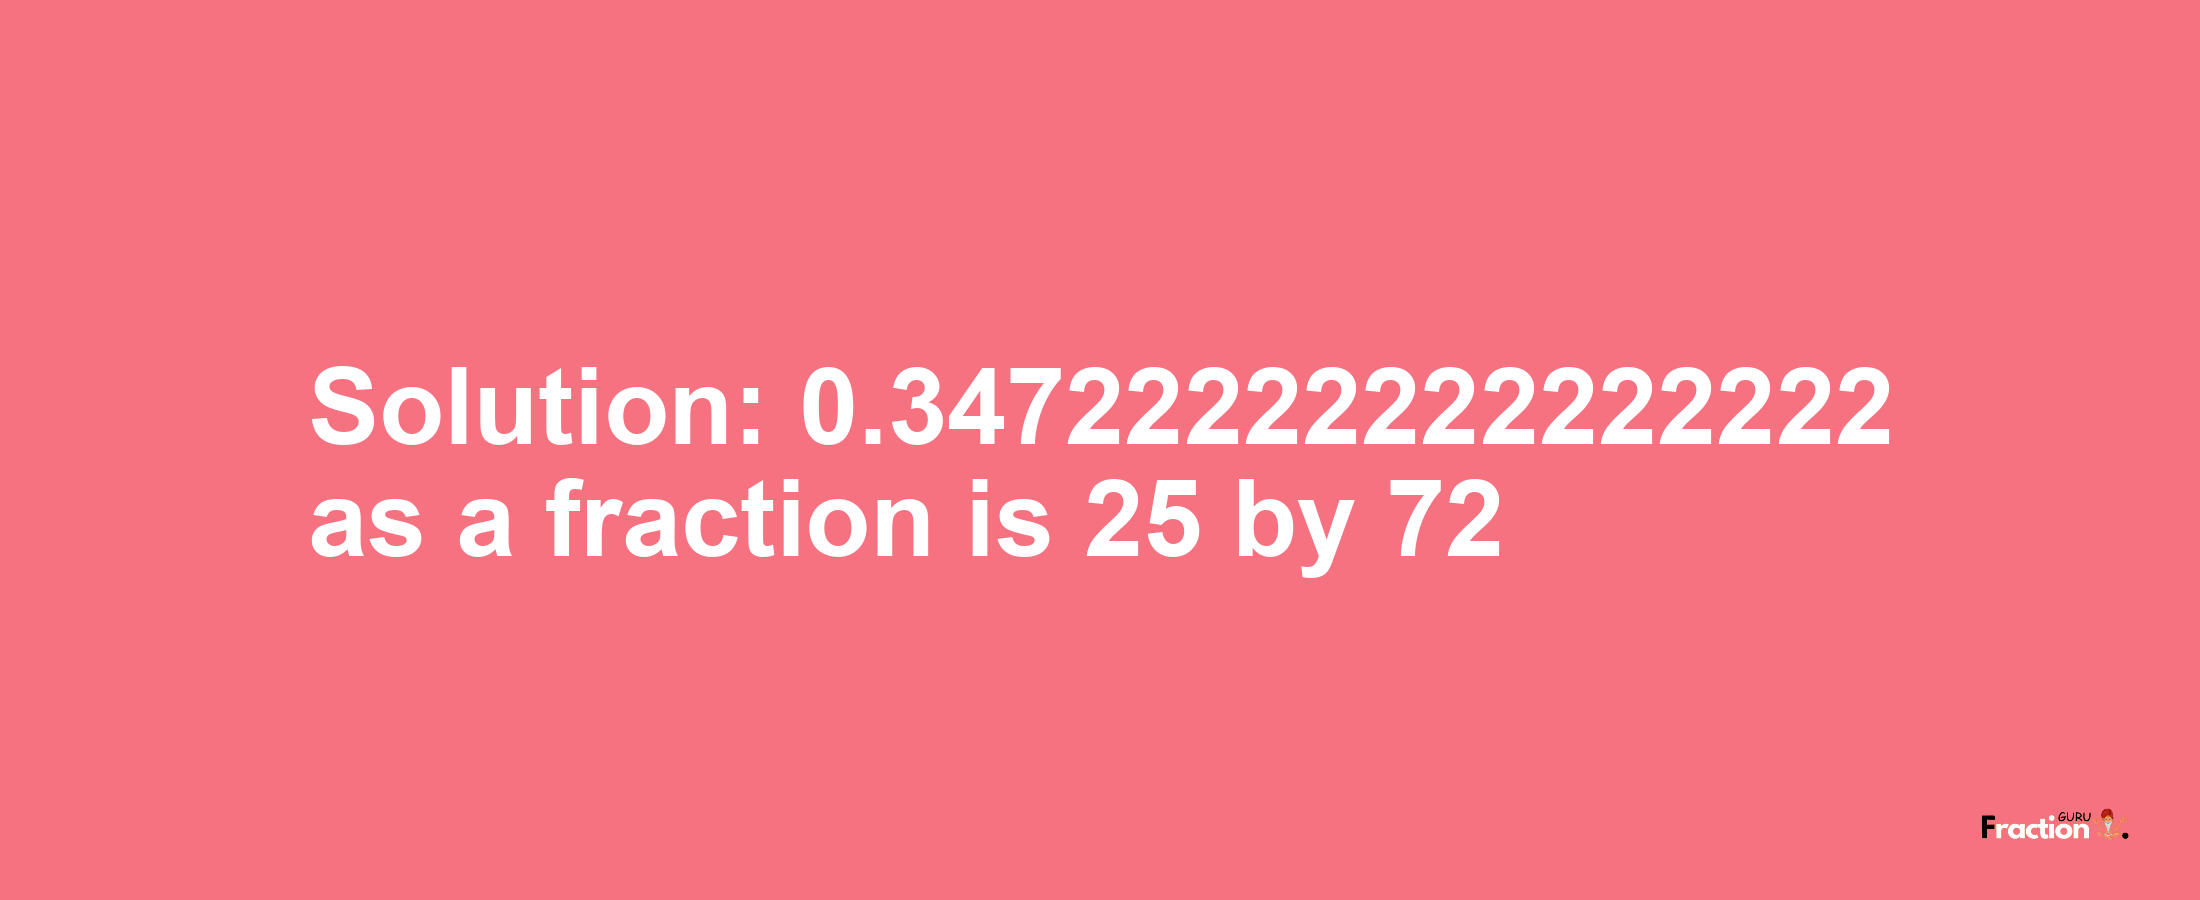 Solution:0.34722222222222222 as a fraction is 25/72